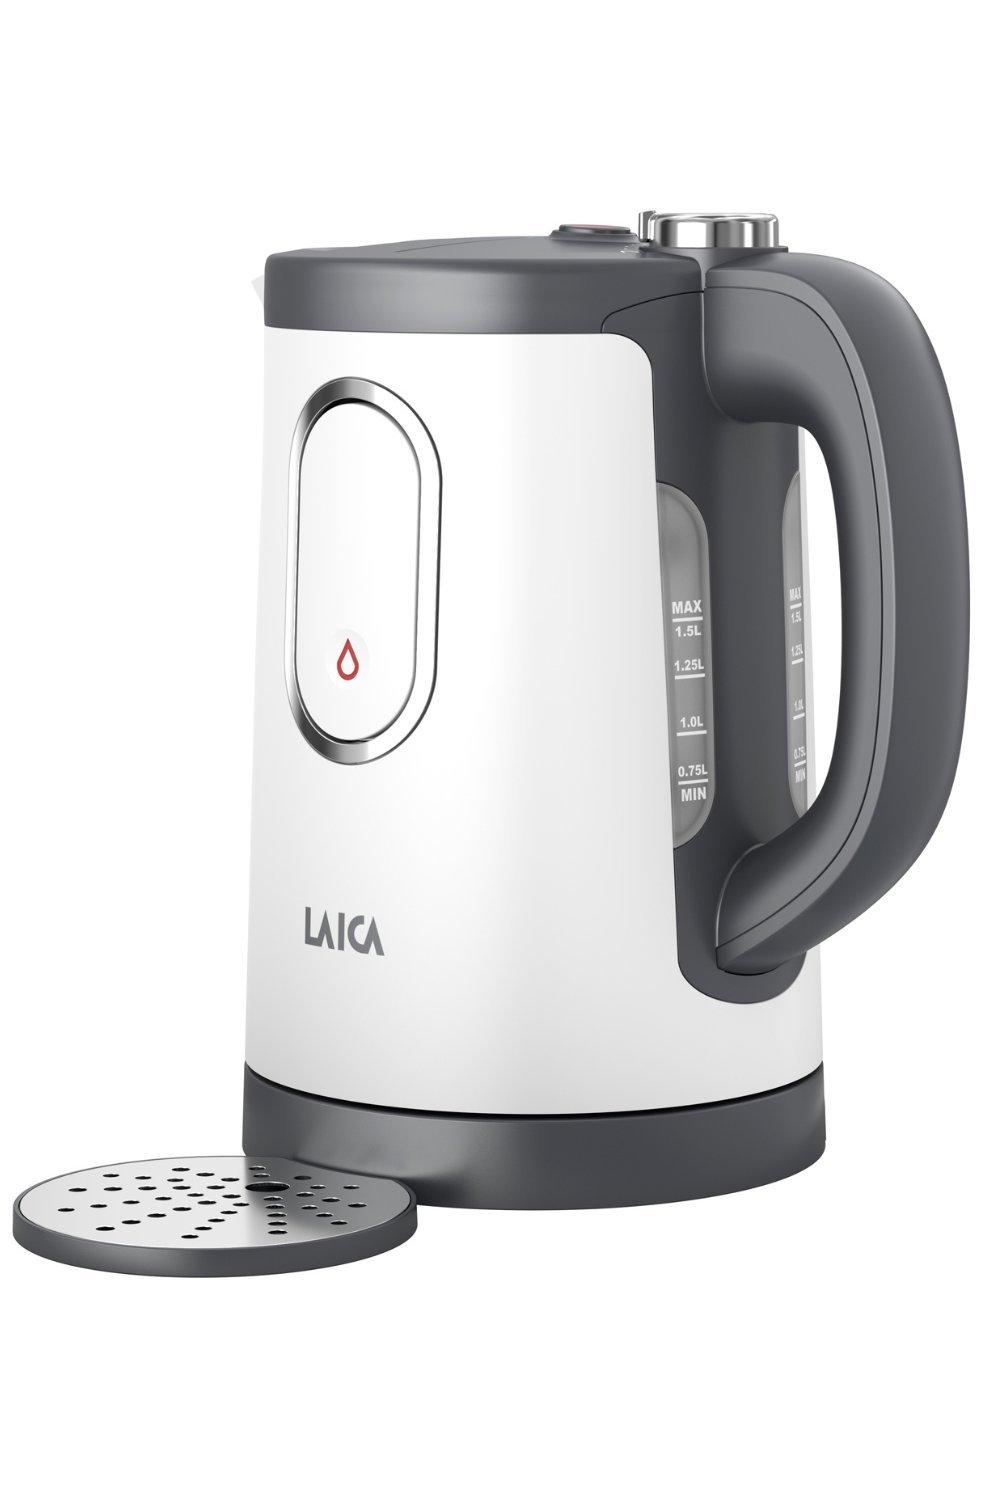 Dual Flo Electric Kettle With One-Cup Fast Boil Dispense, 1.5L Capacity